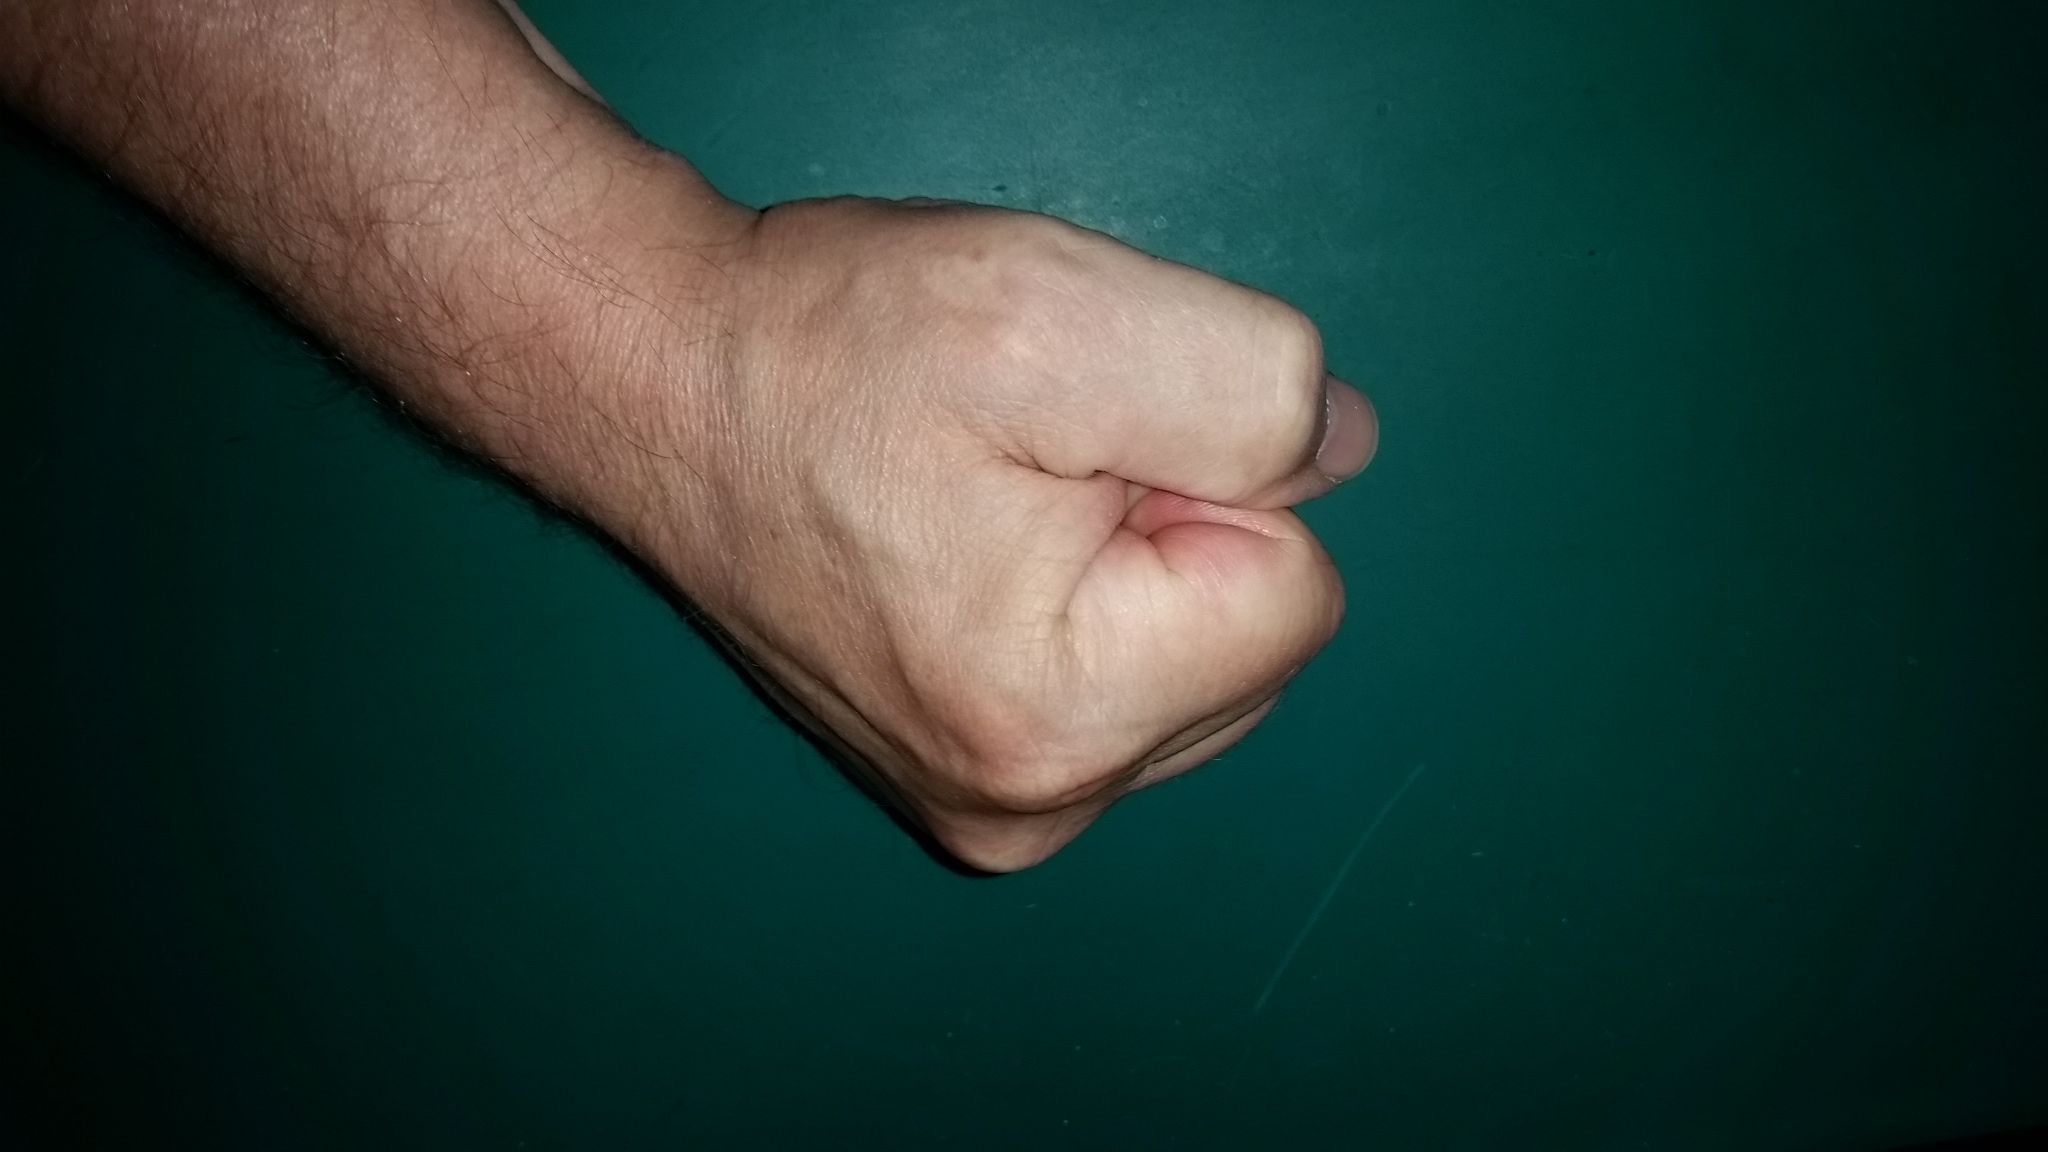 My fist, your pussy?